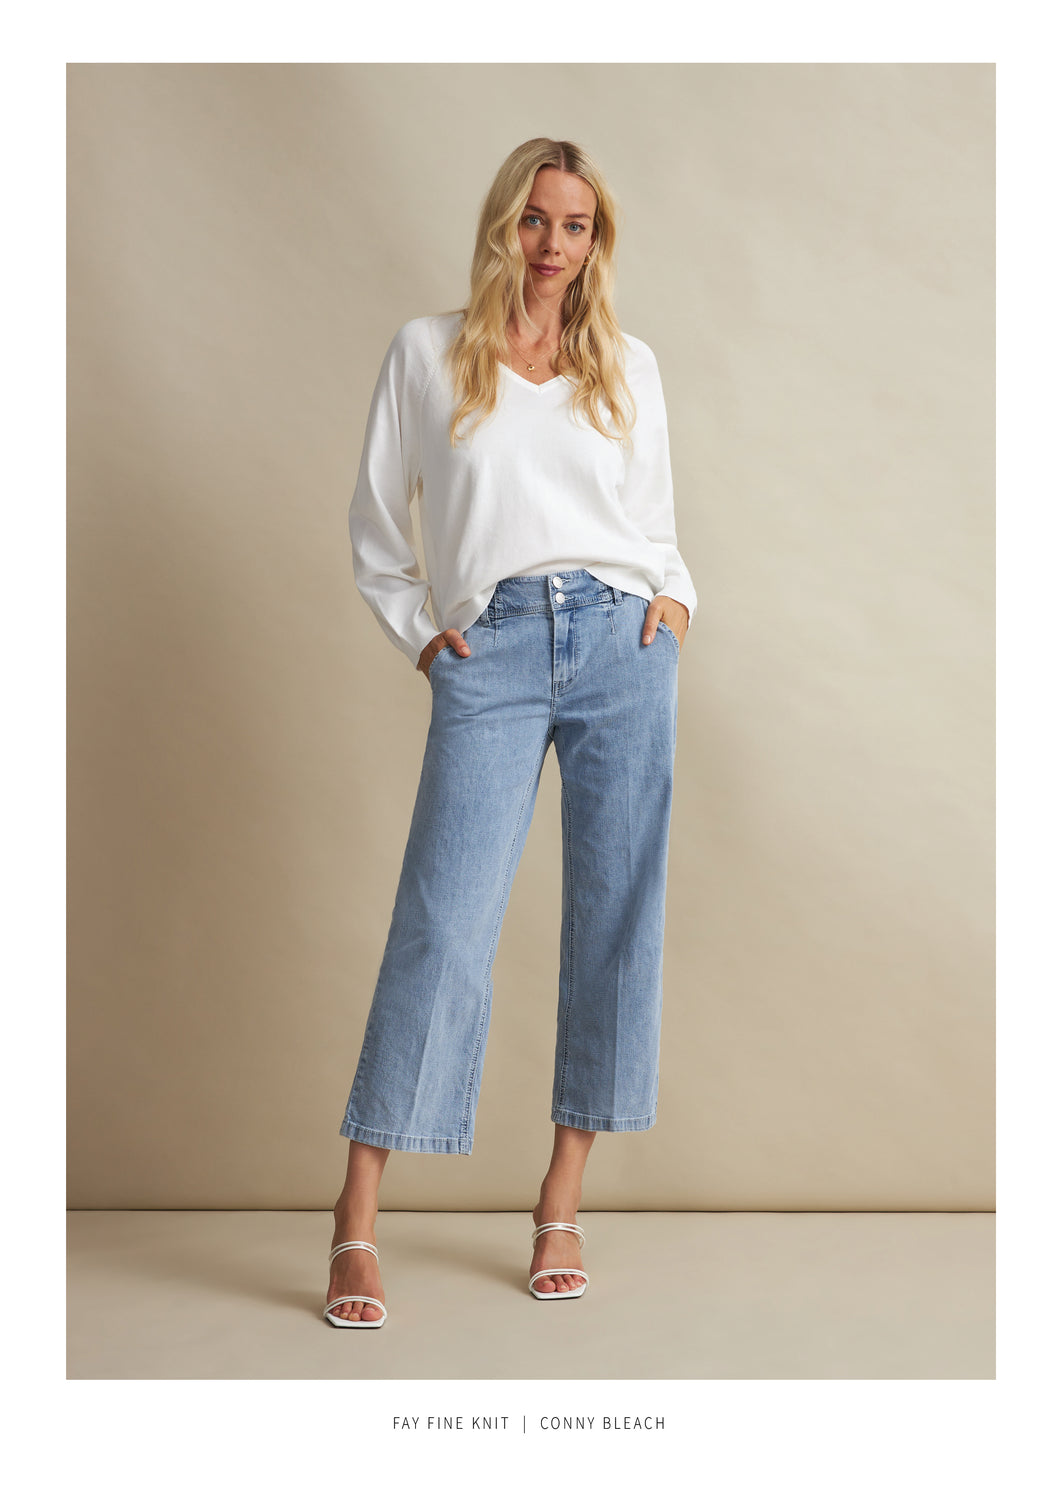 Red Button ‘Conny’ Cropped Jeans